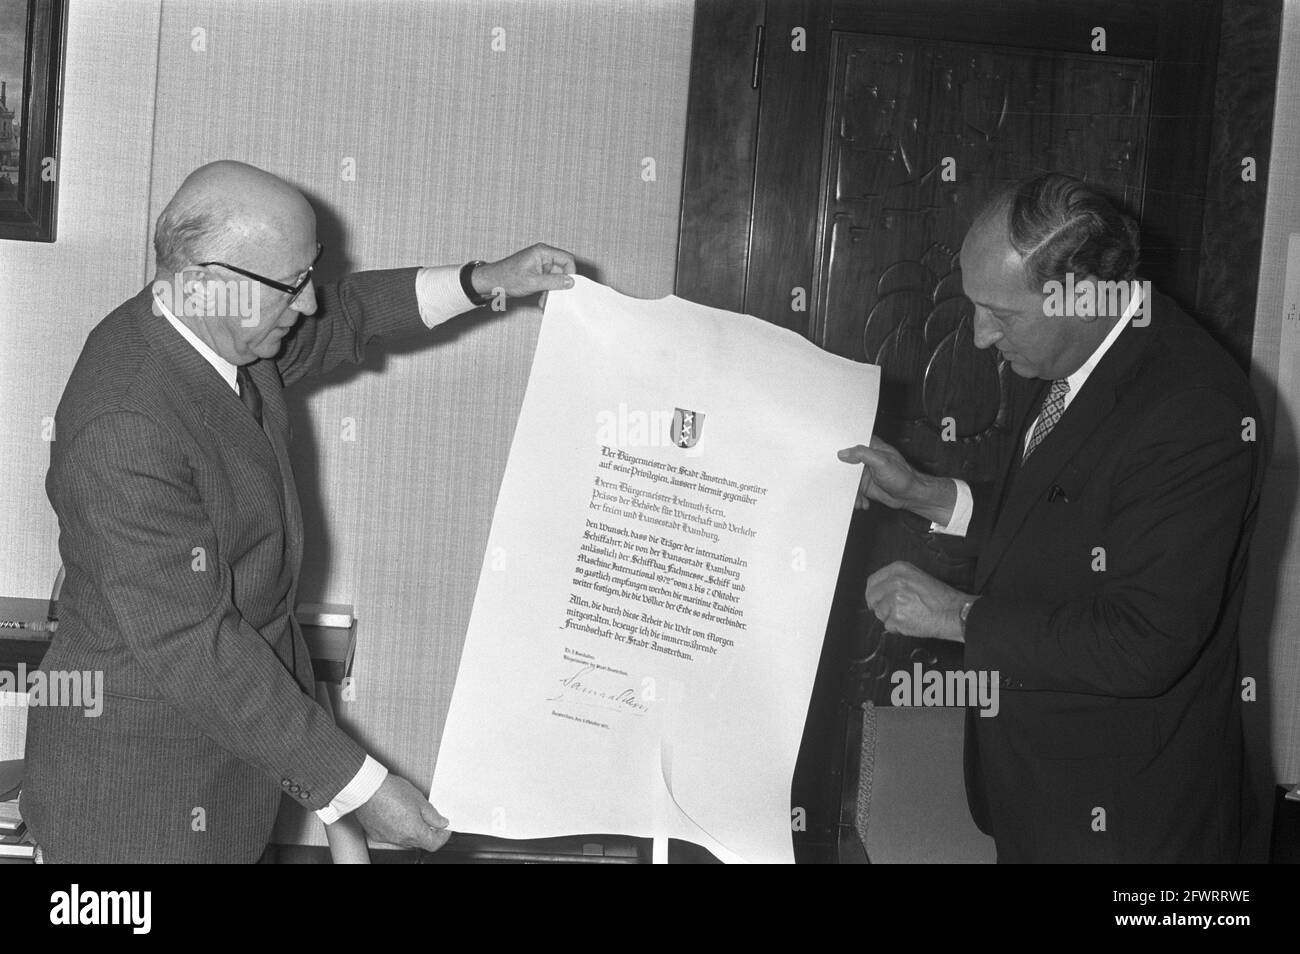 Czaar Peter ( ir. K. K. van Hoffen of Stork werkspoor Diesel) received by Mayor Samkalden at city hall, 28 September 1972, receptions, city halls, The Netherlands, 20th century press agency photo, news to remember, documentary, historic photography 1945-1990, visual stories, human history of the Twentieth Century, capturing moments in time Stock Photo